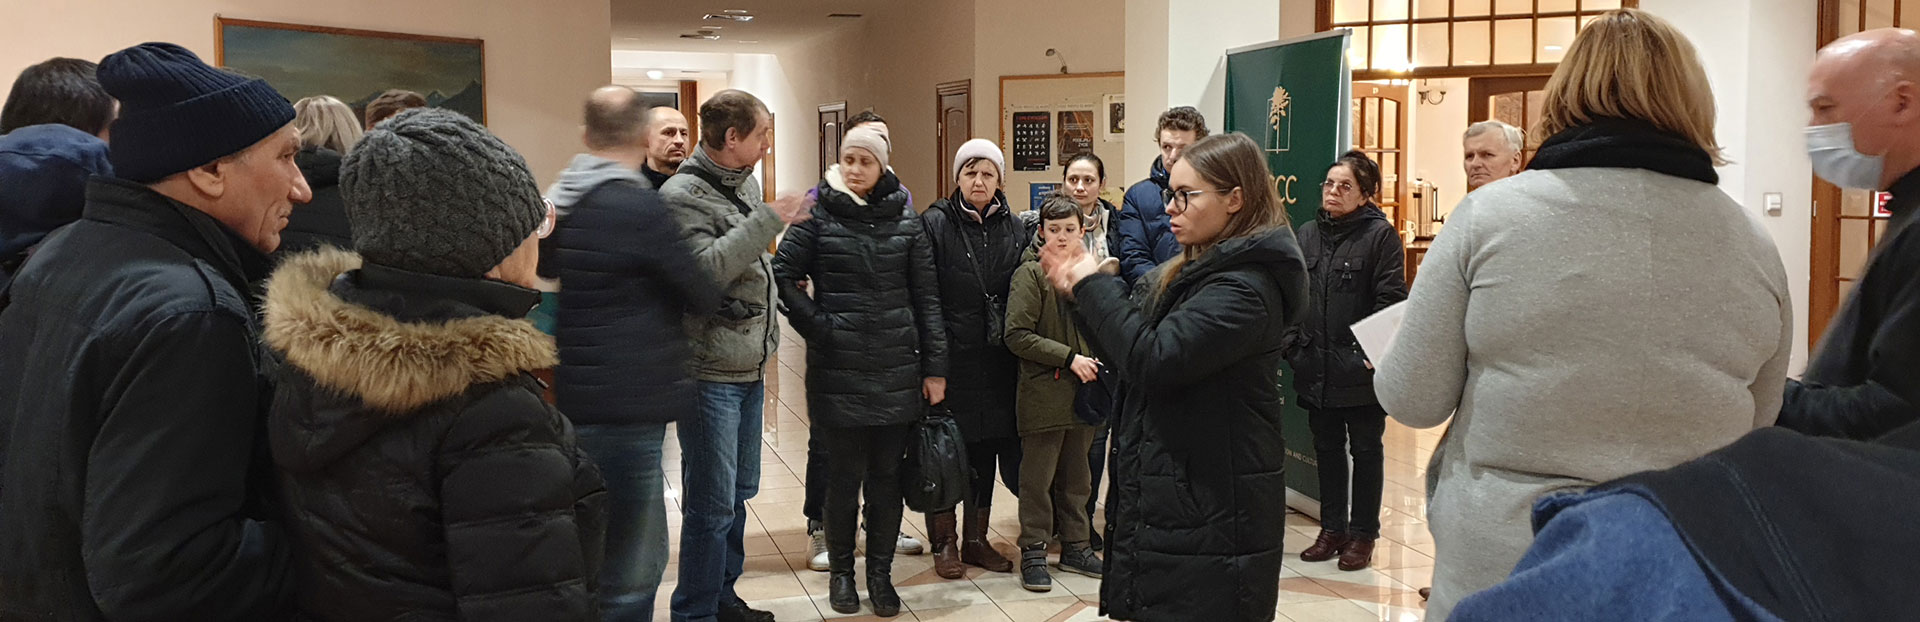 The Society of Jesus Coordinates Support for Crisis in Ukraine